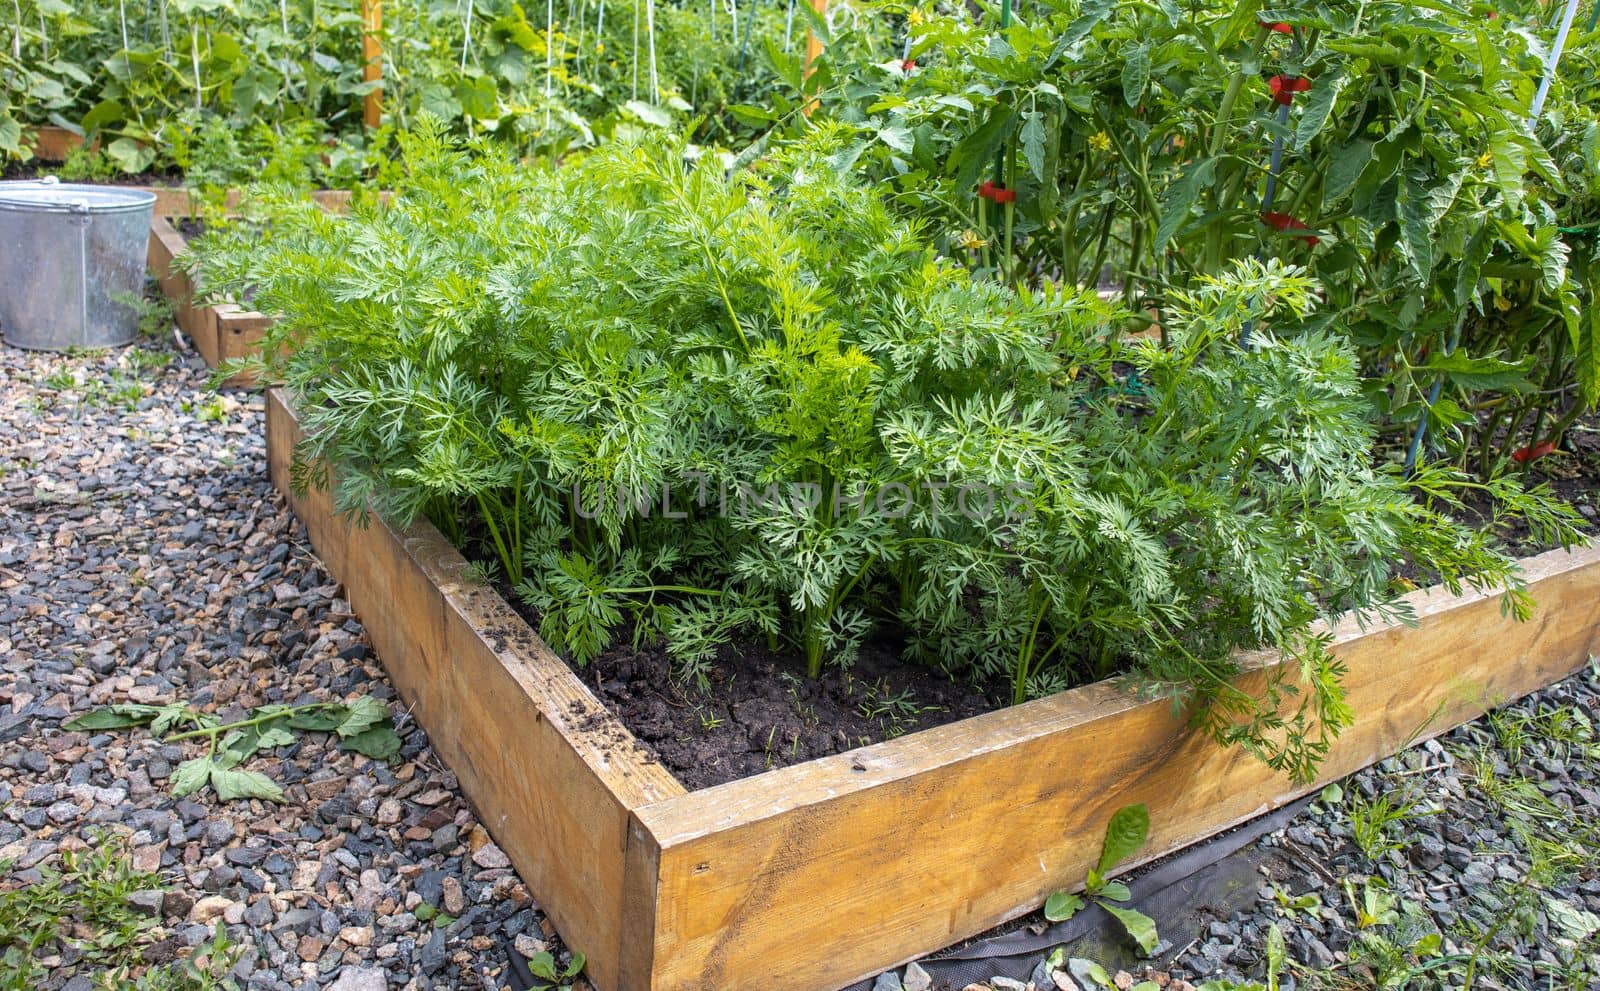 Growing vegetables on a raised wooden bed in the backyard garden, vegetable growing concept.